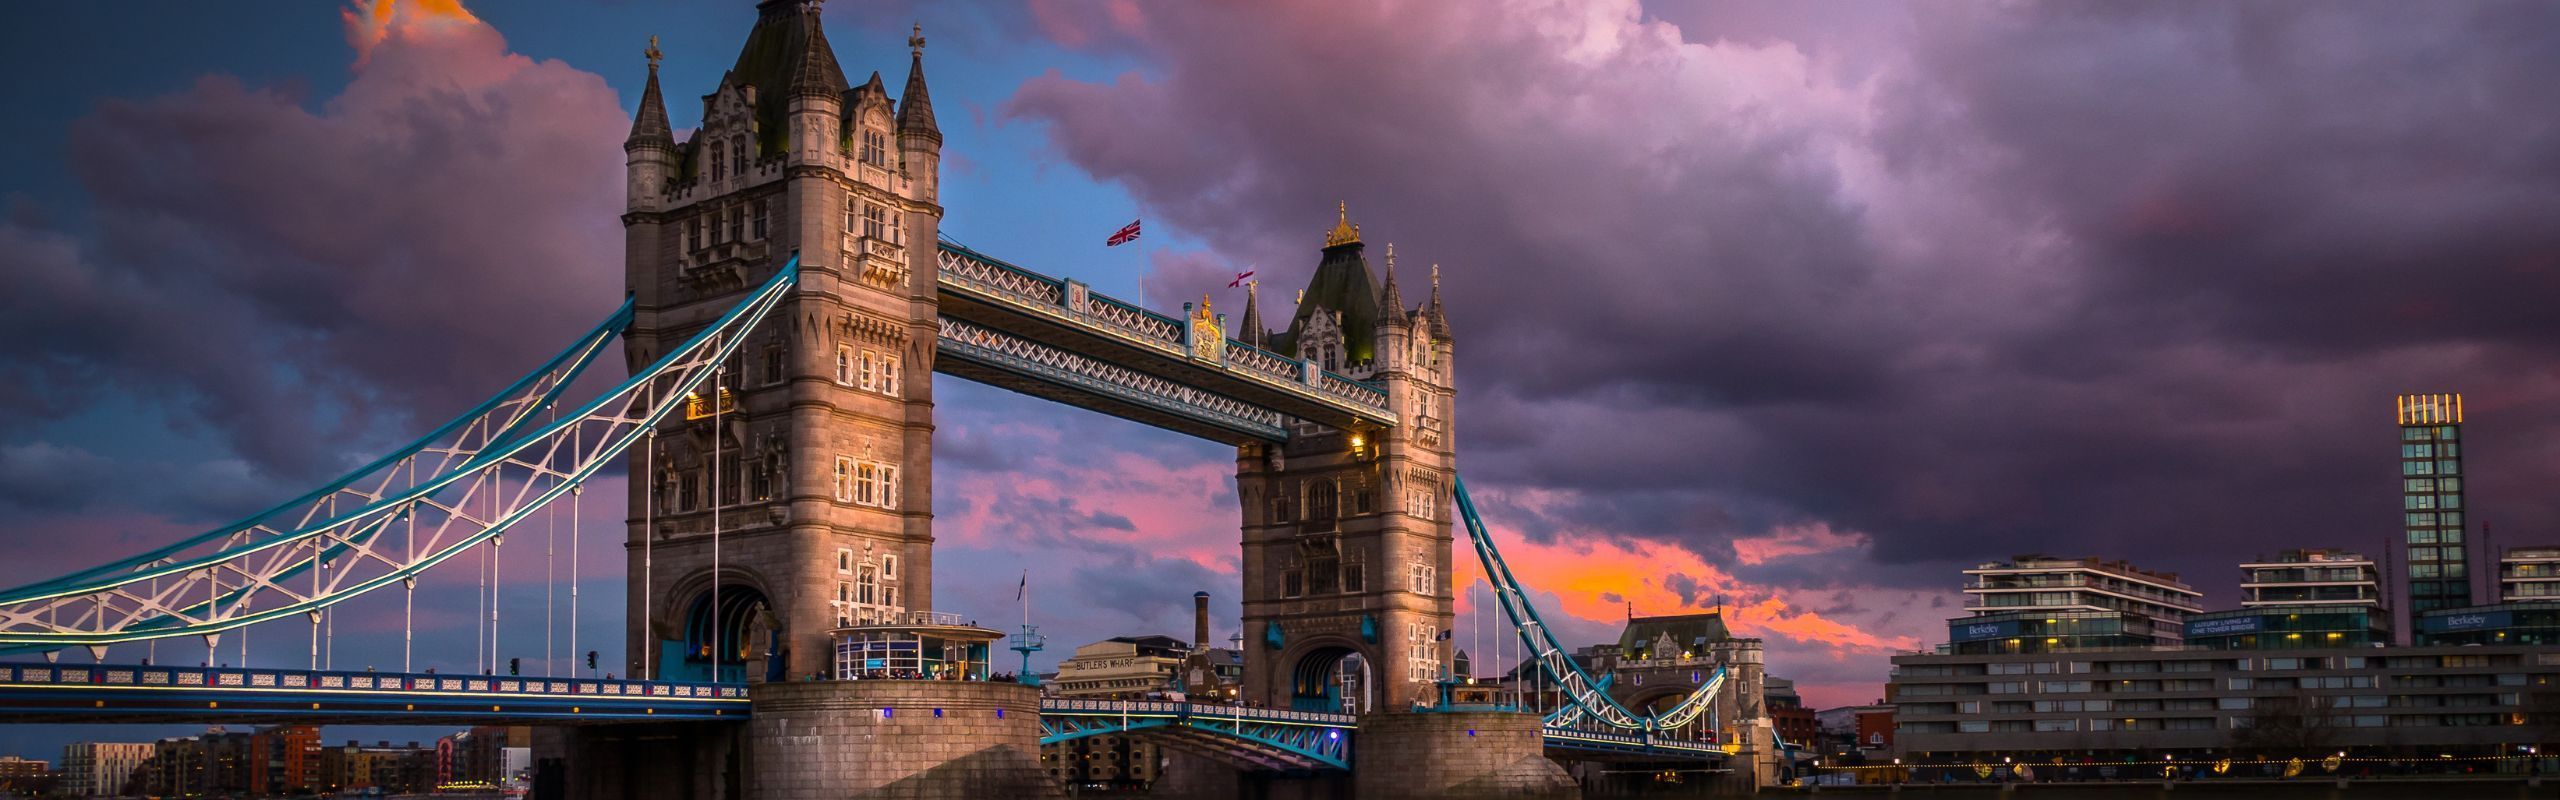 Image of the Tower Bridge in London against a purple sky